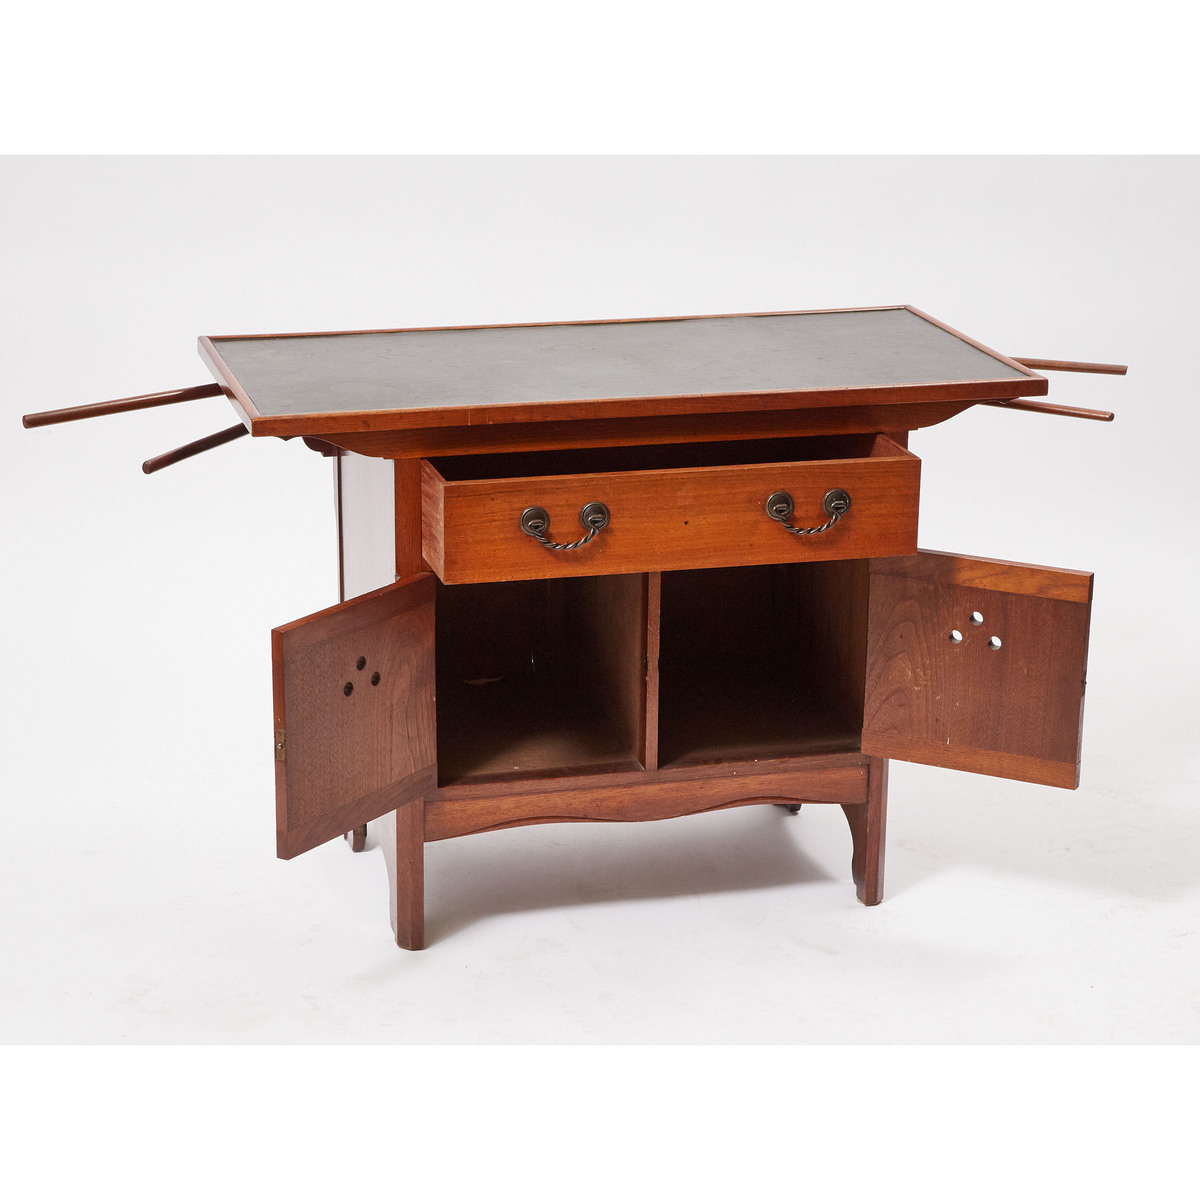 Arthur W. Simpson Arts and Crafts Oak Washstand, Kendal, UK, c.1890, 29.25 x 41 x 19.75 in — 74.3 x - Image 2 of 2